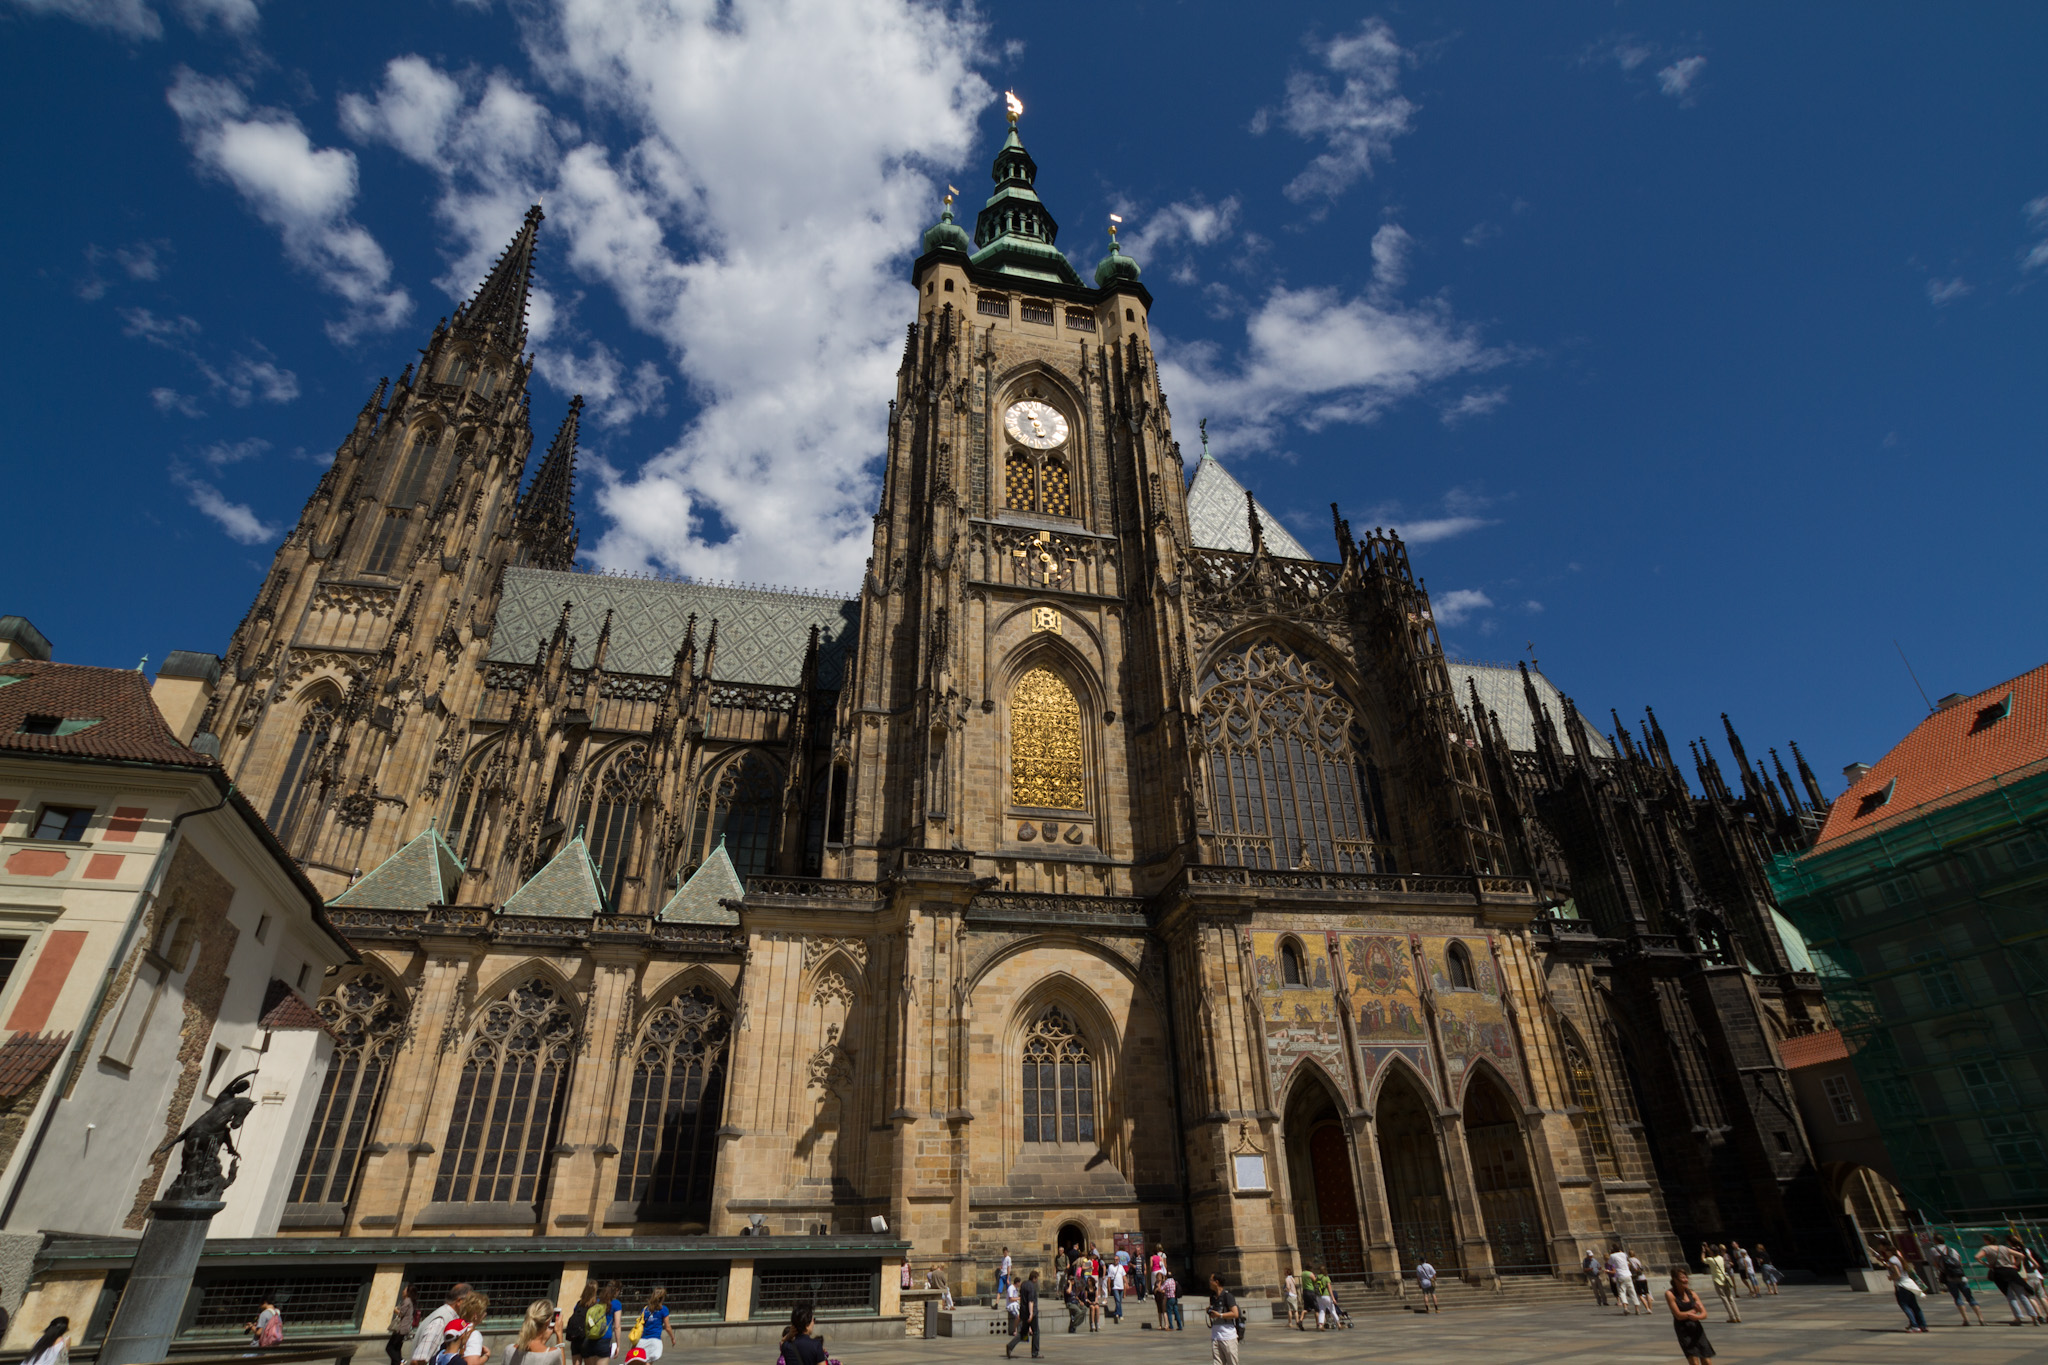 Nice Images Collection: St. Vitus Cathedral Desktop Wallpapers